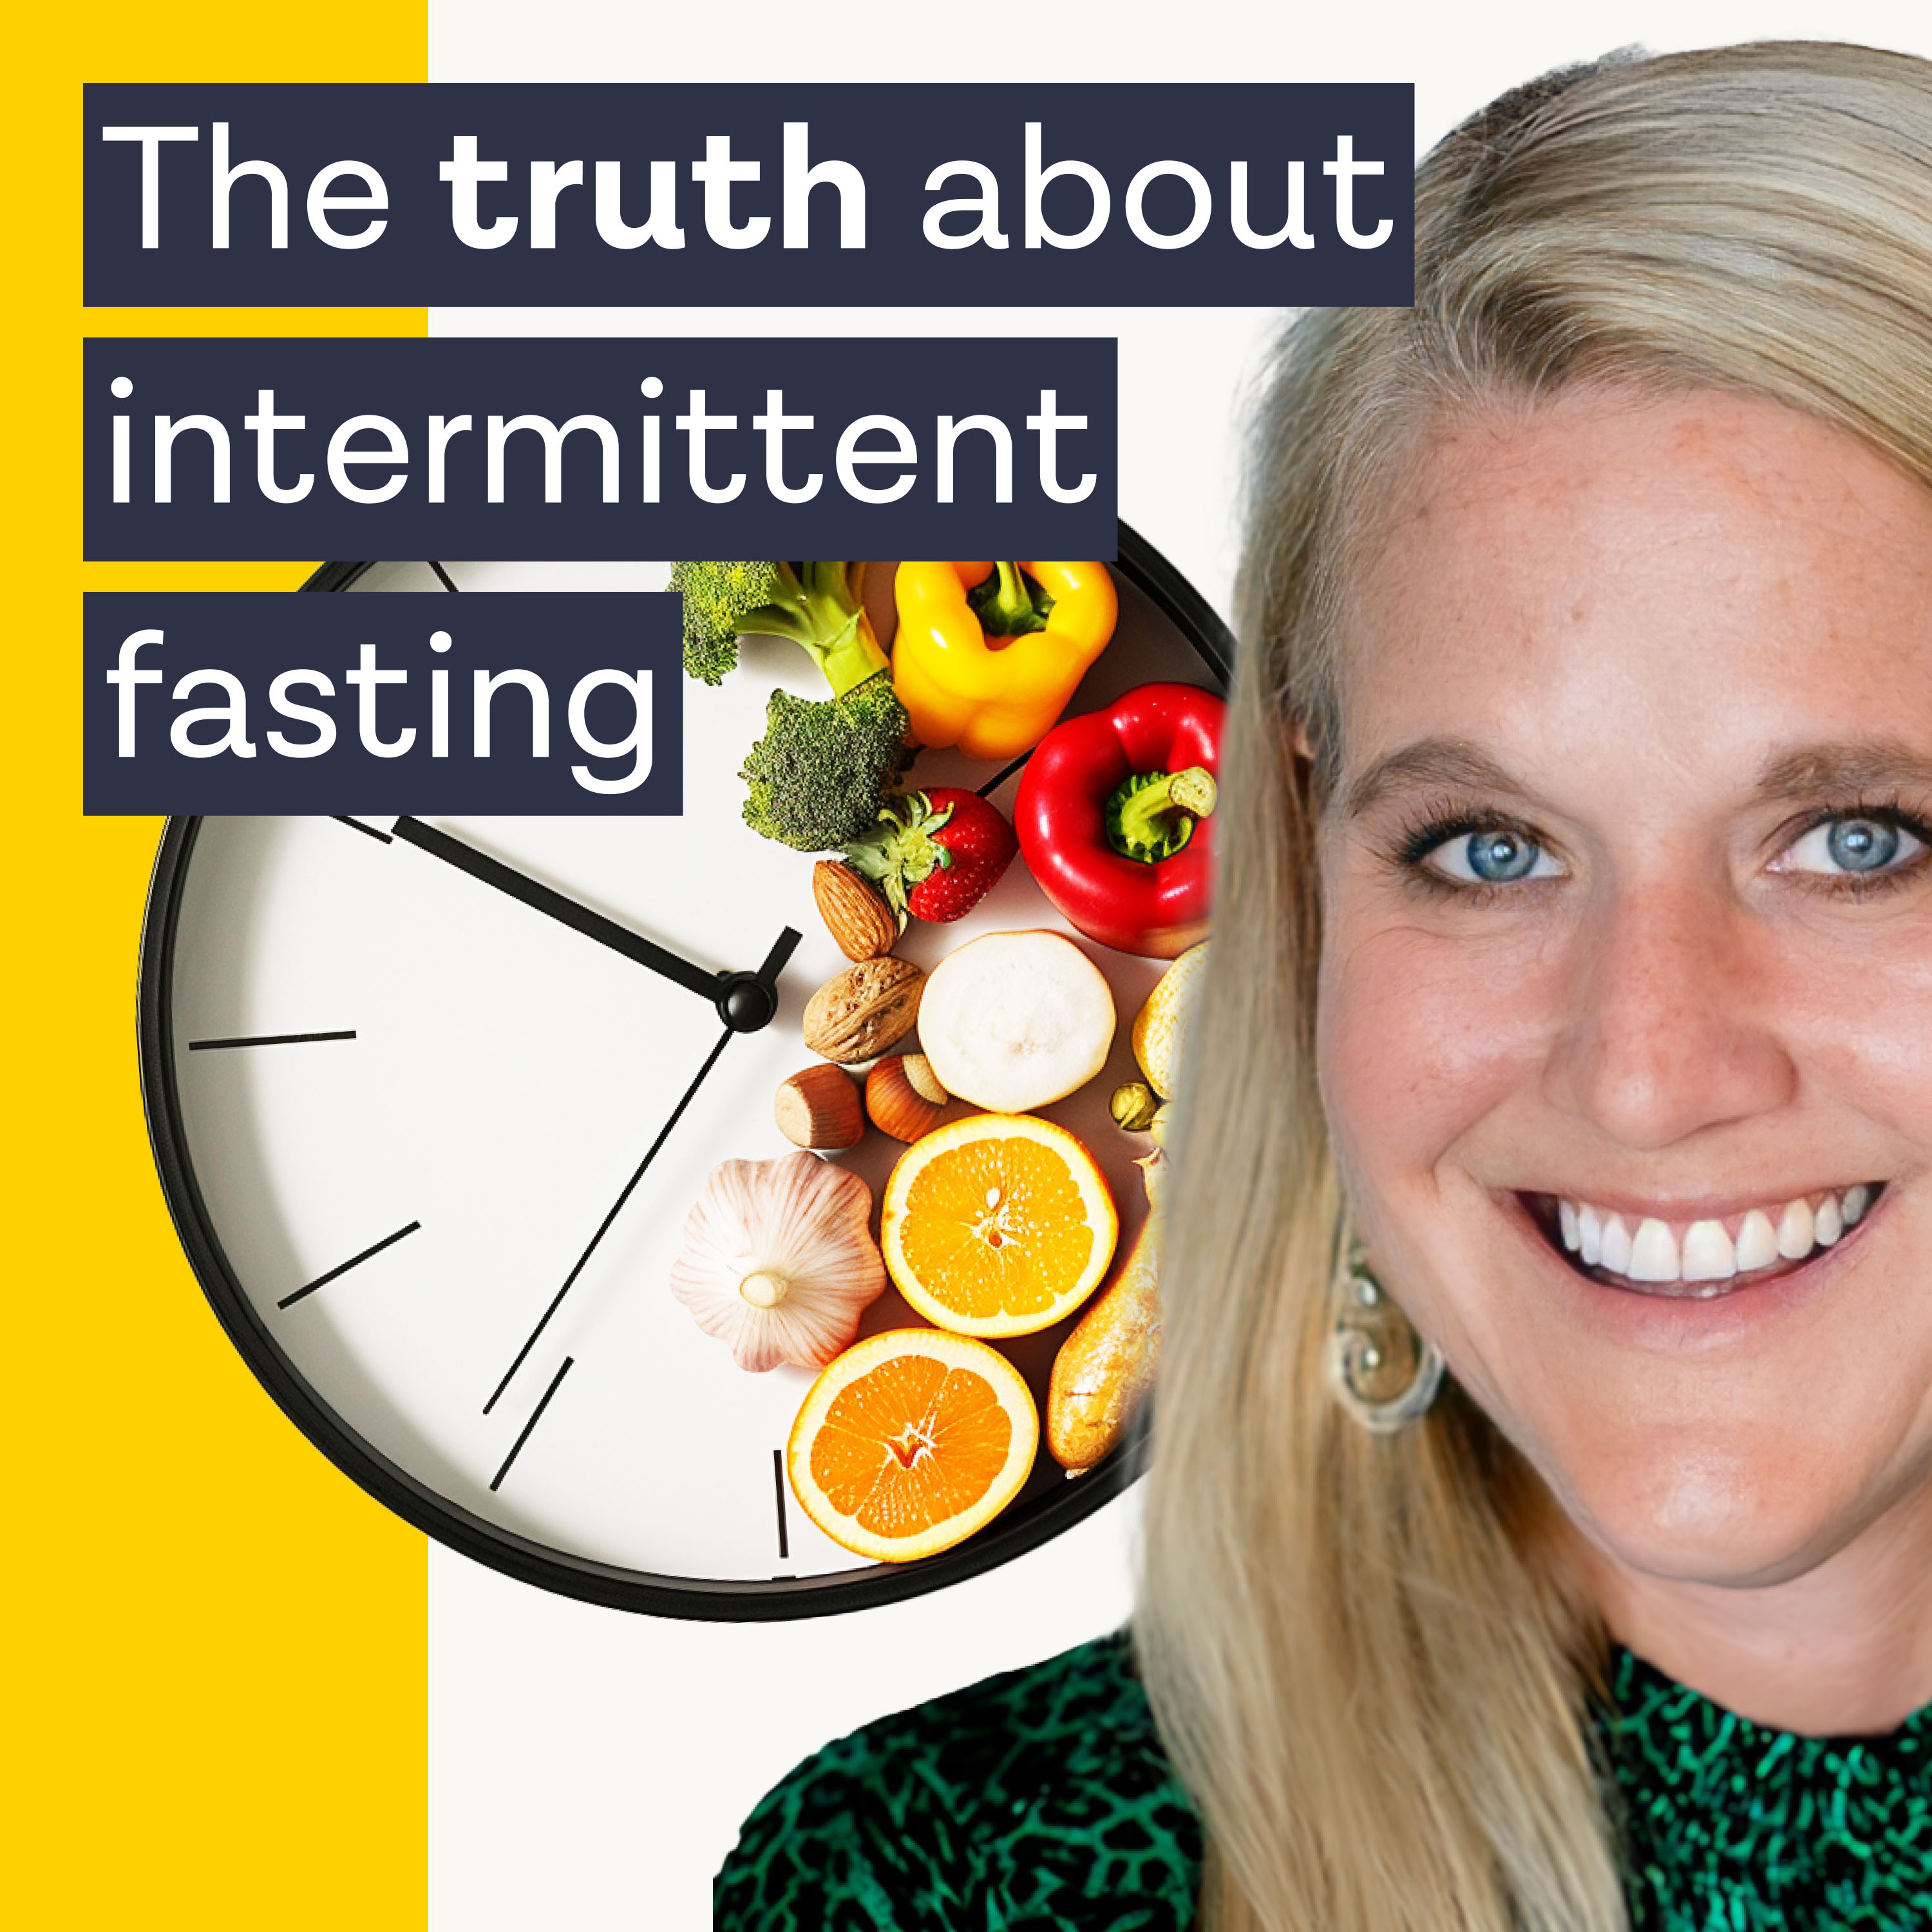 Intermittent fasting: what we learned from the world's biggest study with Prof. Tim Spector & Gin Stephens